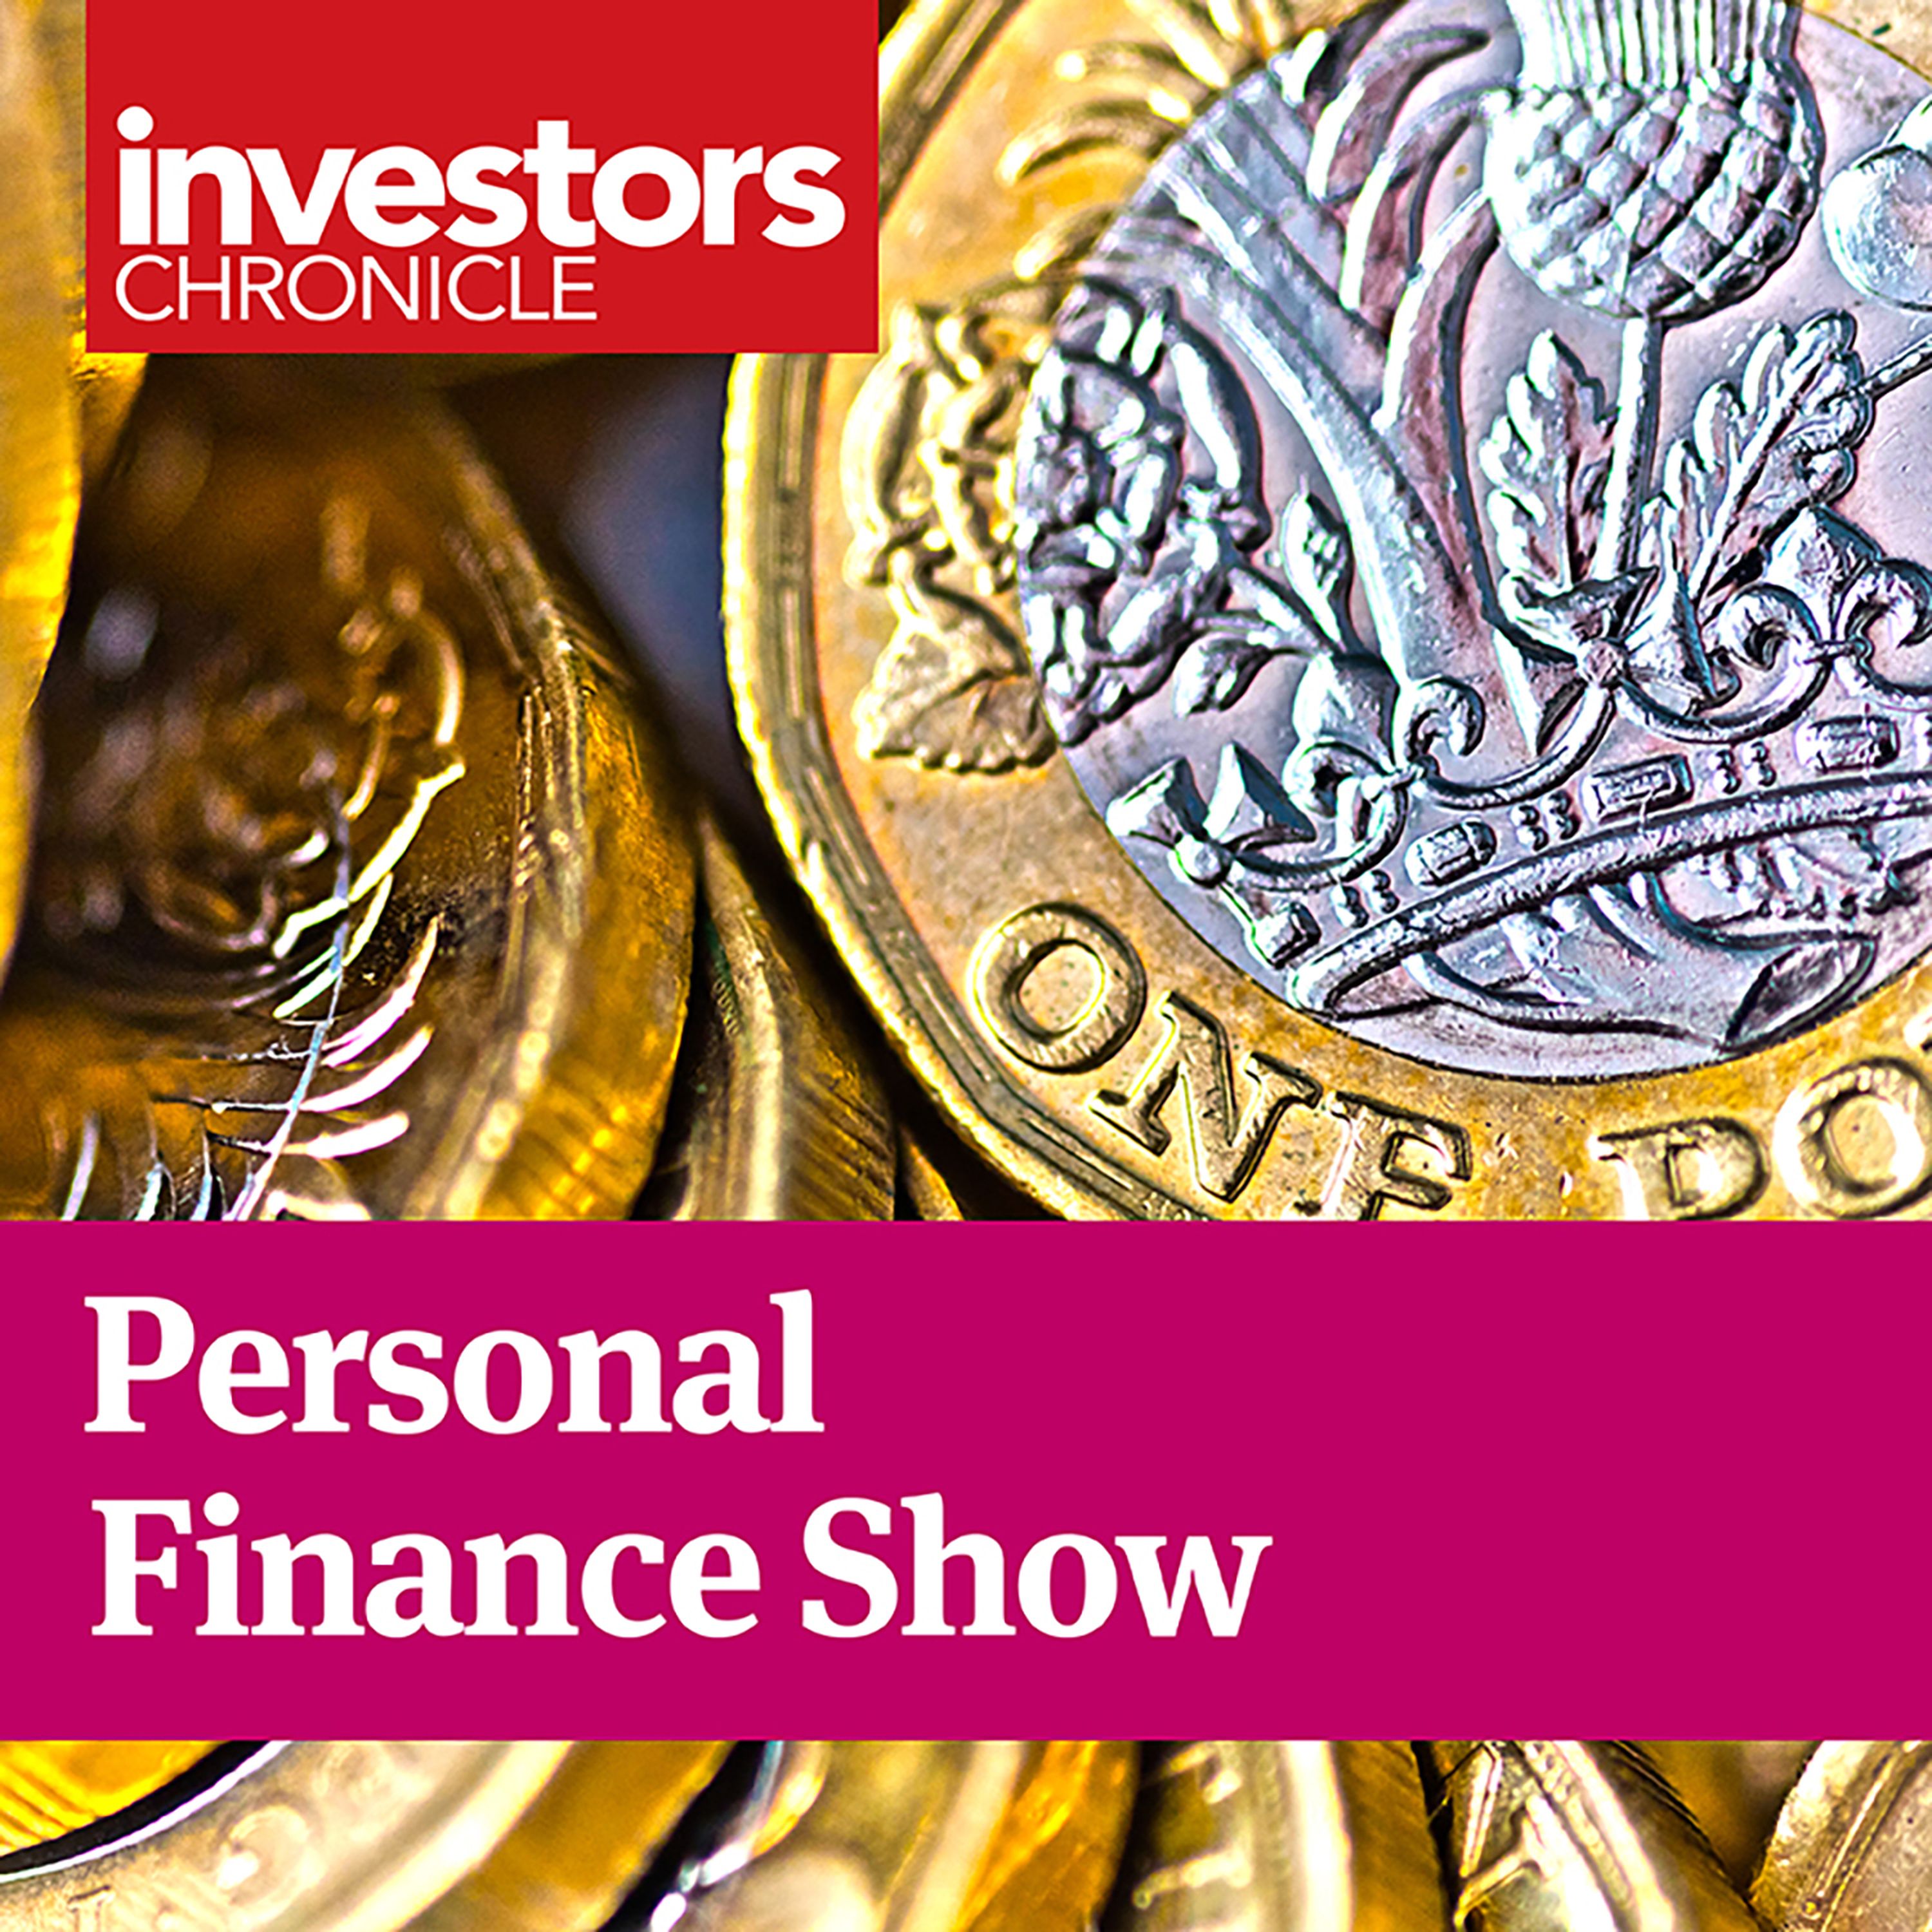 Personal Finance Show: American value for money and bonds with better returns